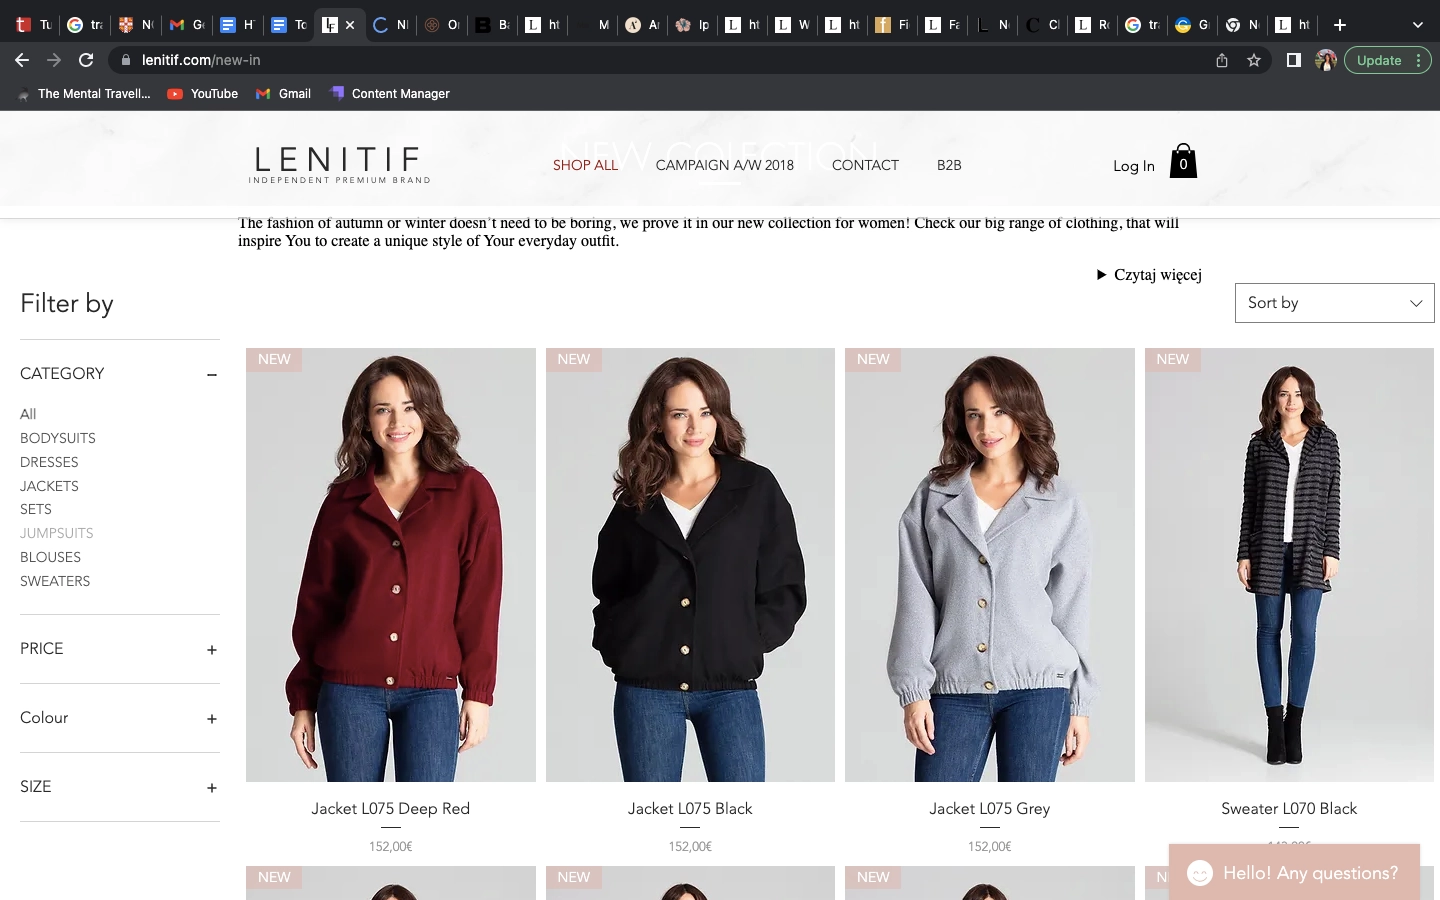 Basic and elegant women clothes from Lenitif’s collection